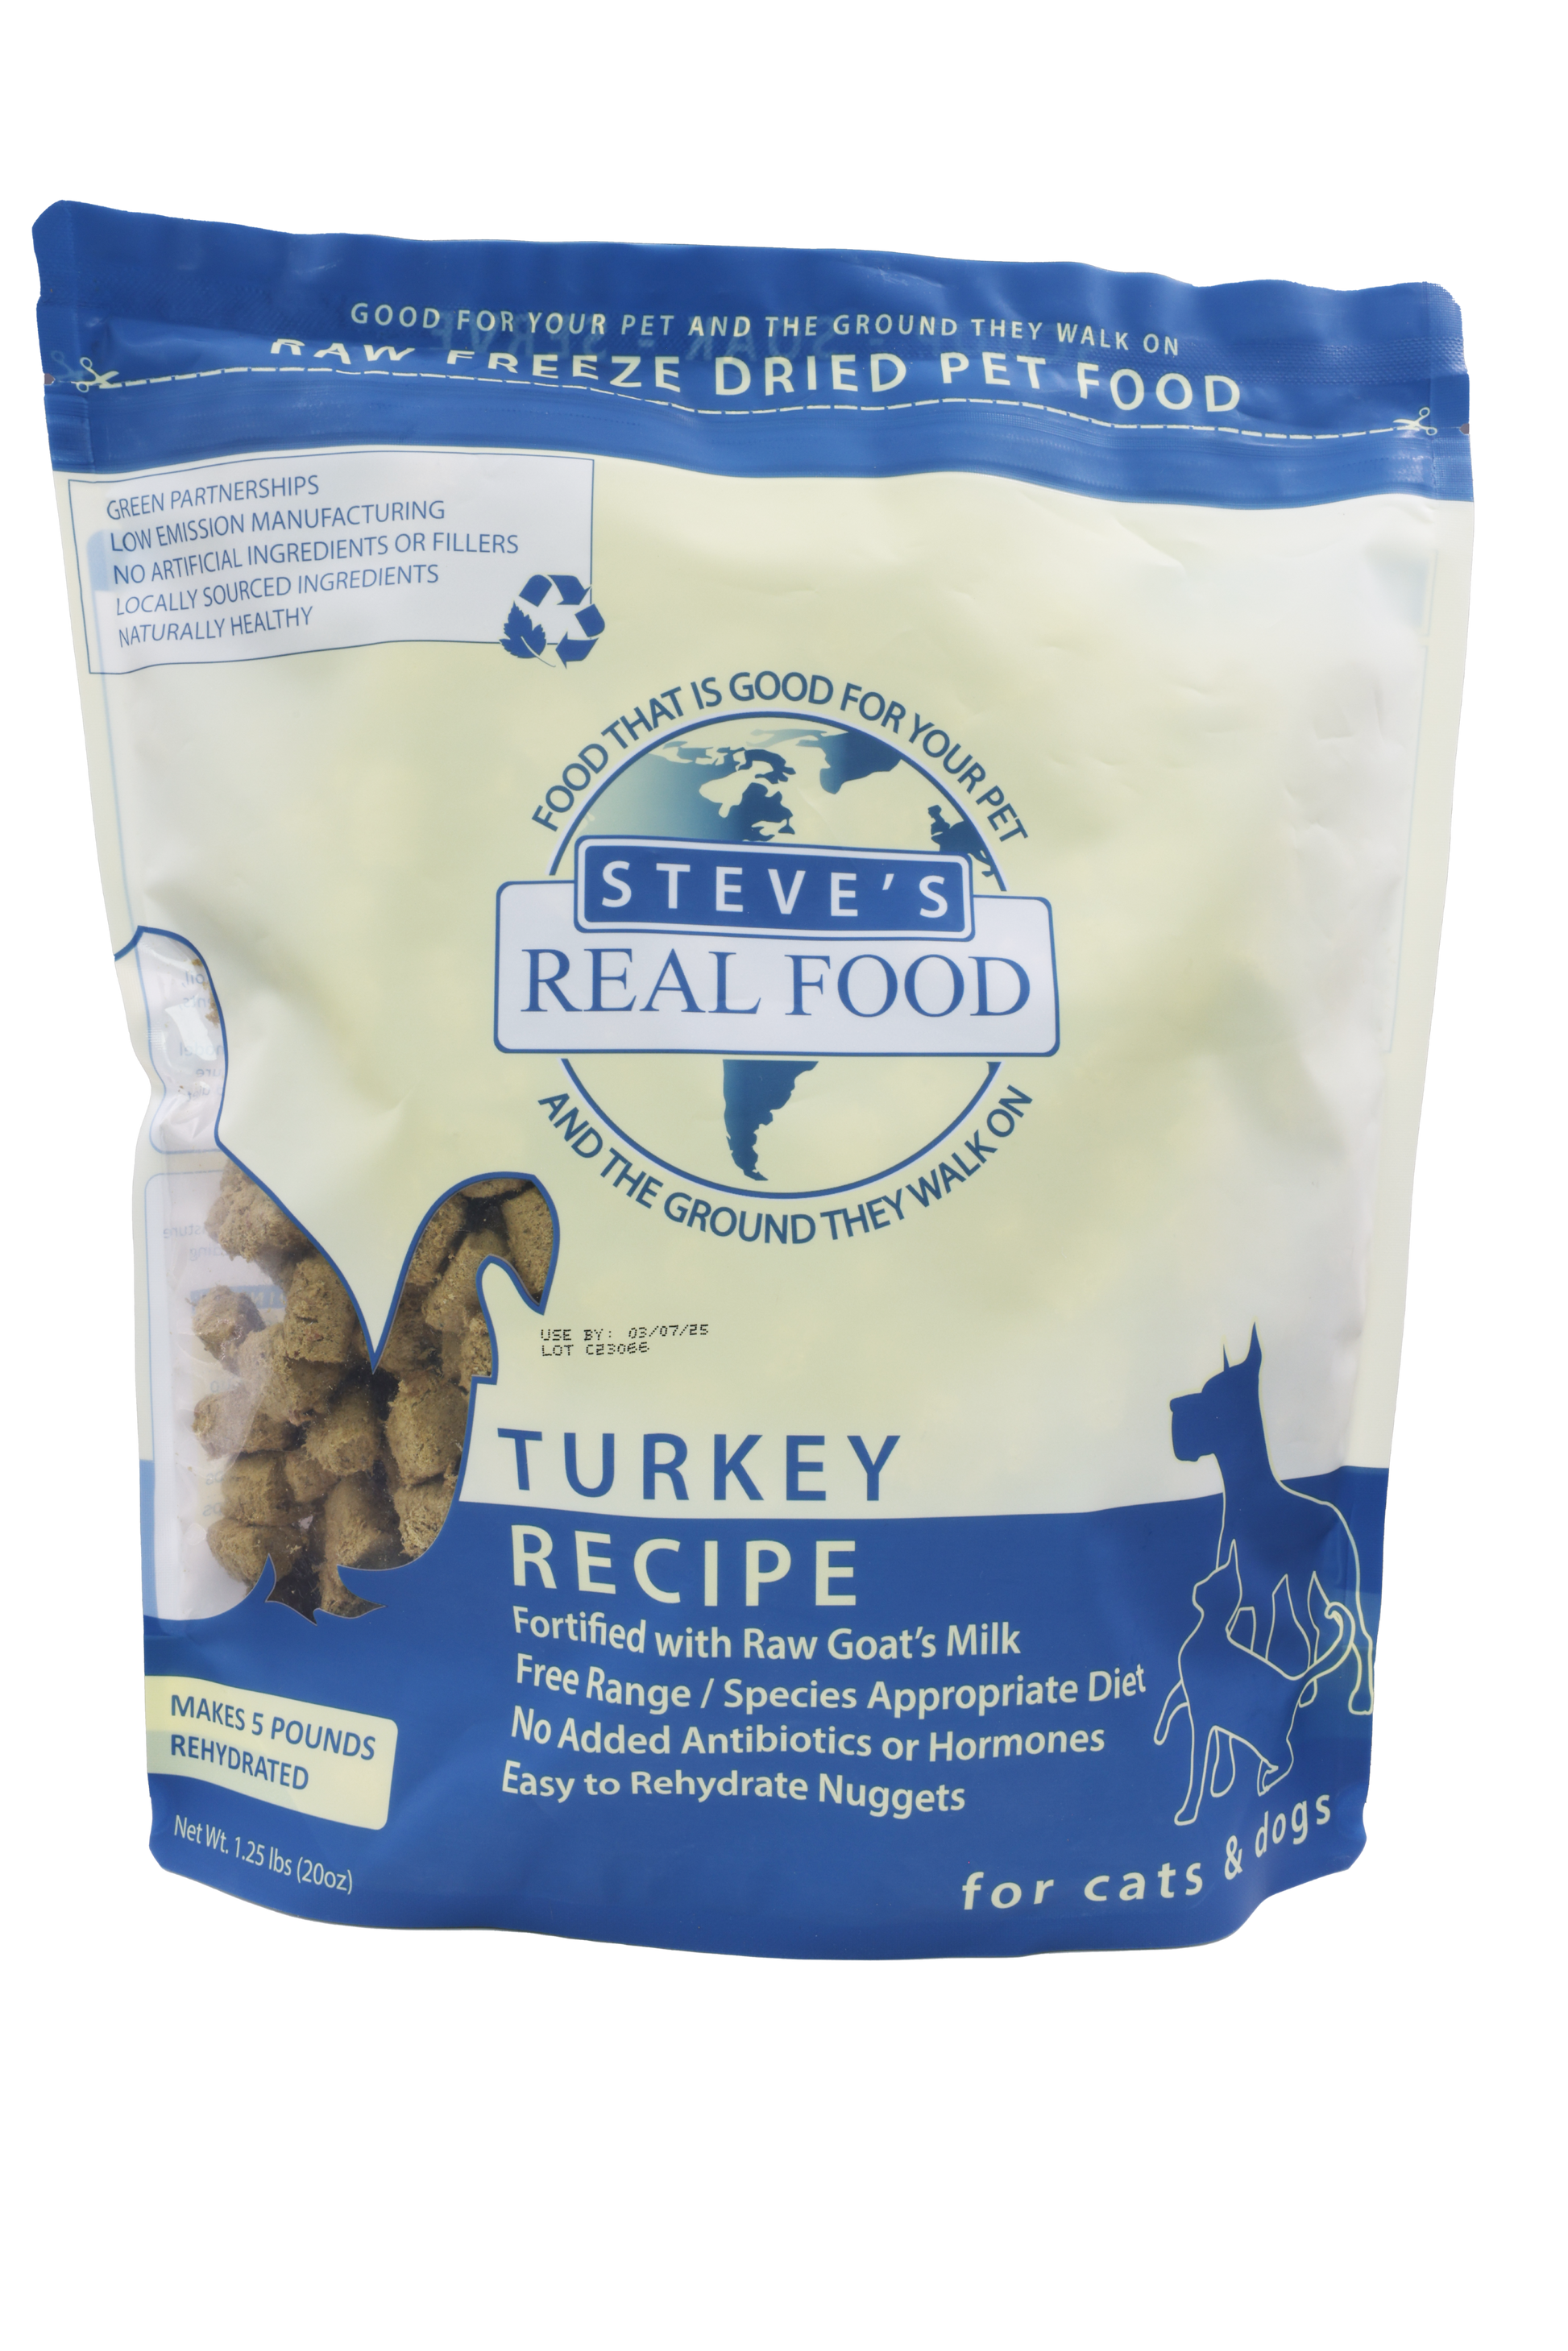 The Real Meat Company Air Dried Chicken Dog & Cat Food